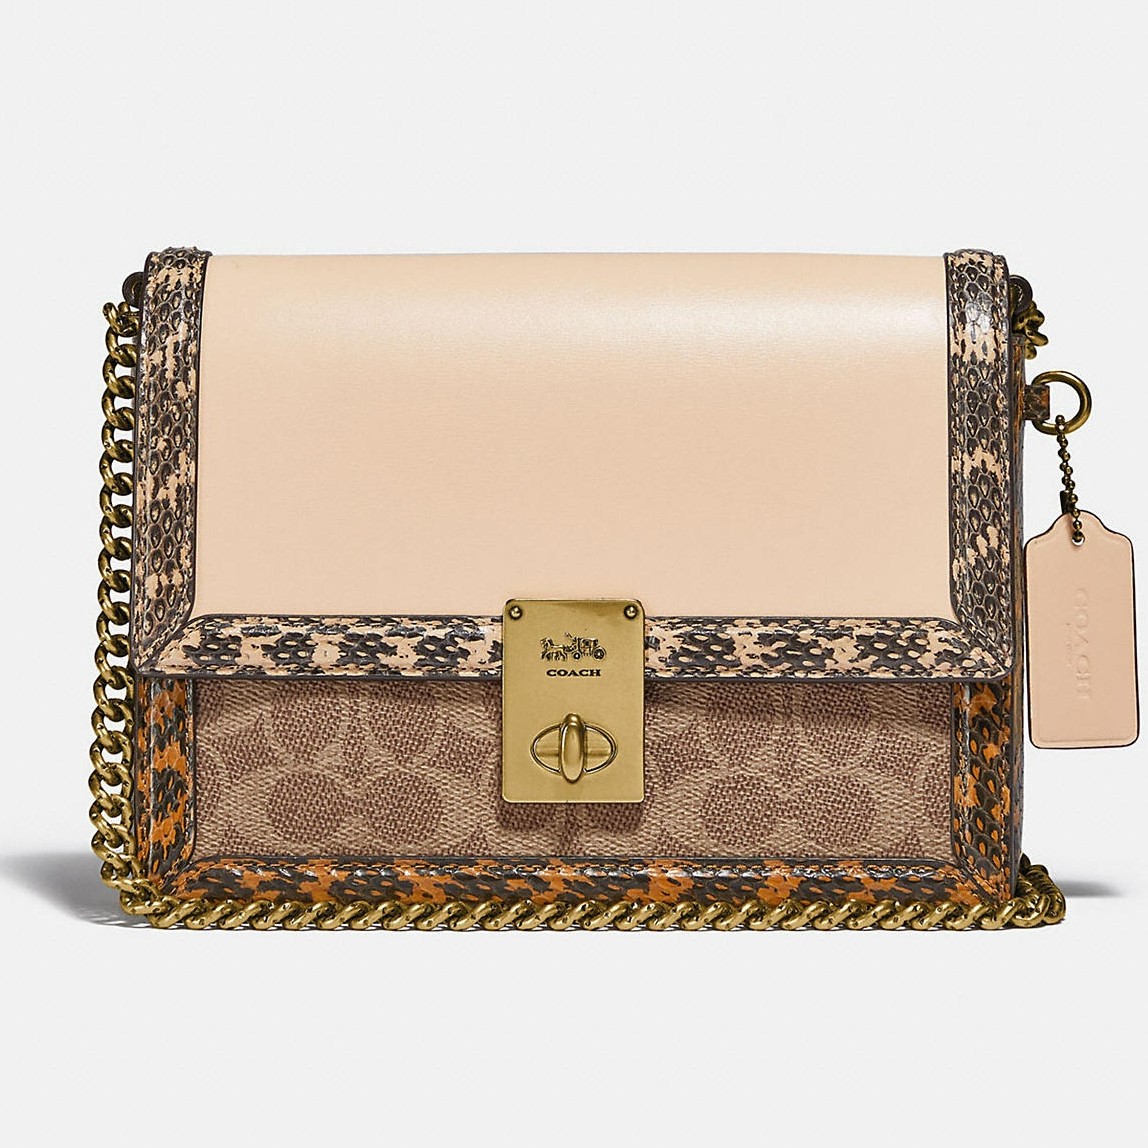 TÚI XÁCH NỮ COACH HUTTON SHOULDER BAG IN SIGNATURE CANVAS WITH SNAKESKIN DETAIL 6